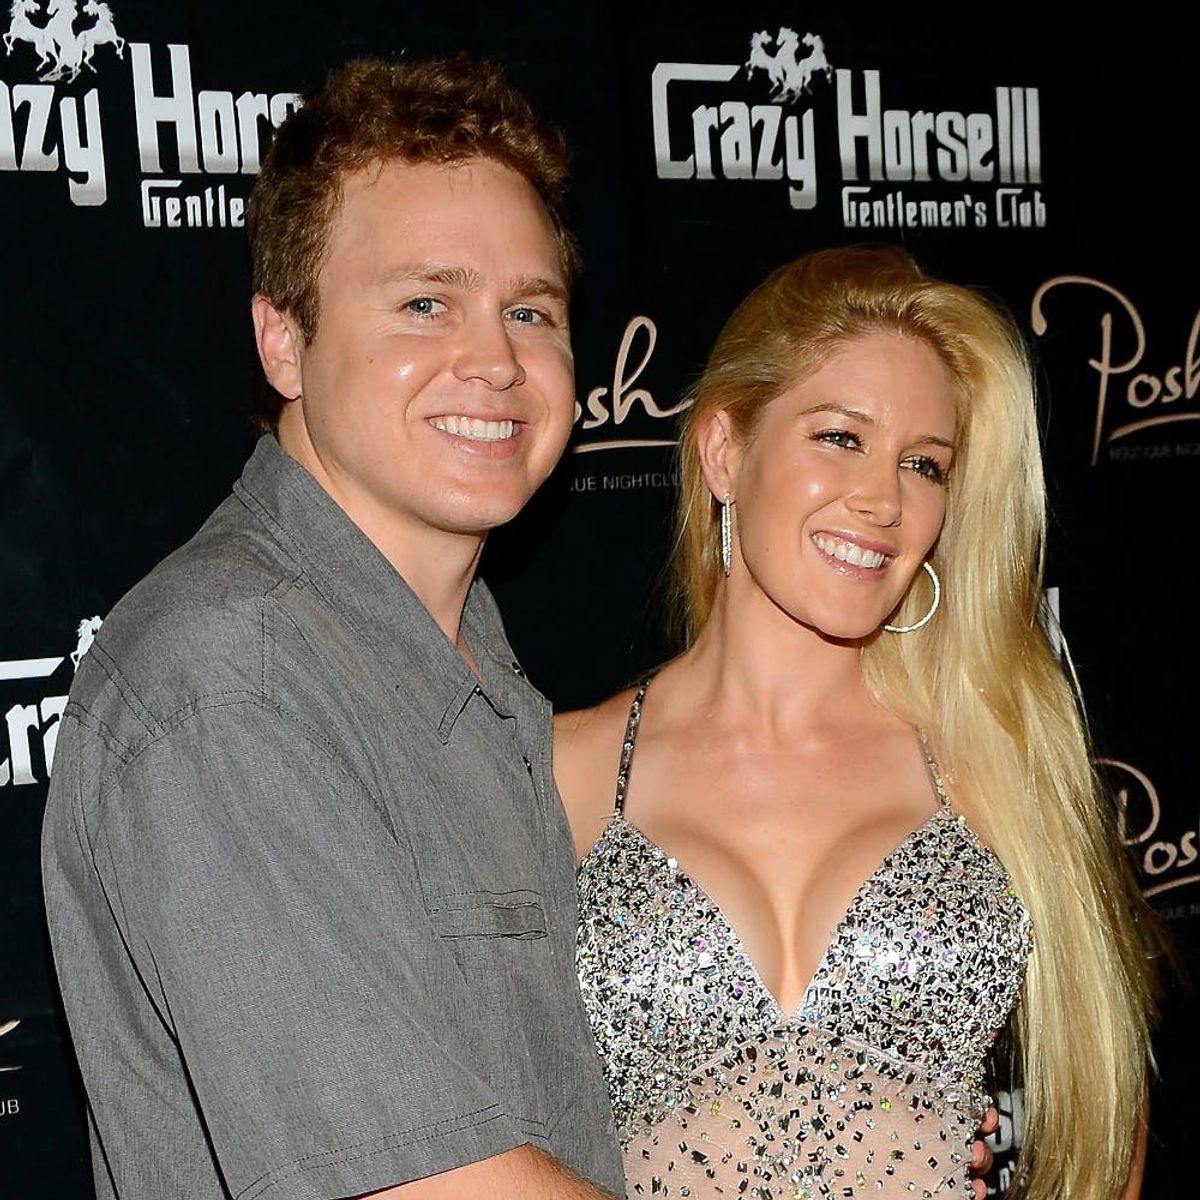 Spencer Pratt and Heidi Montag Will Teach Their Baby What They “Shouldn’t Have Done”